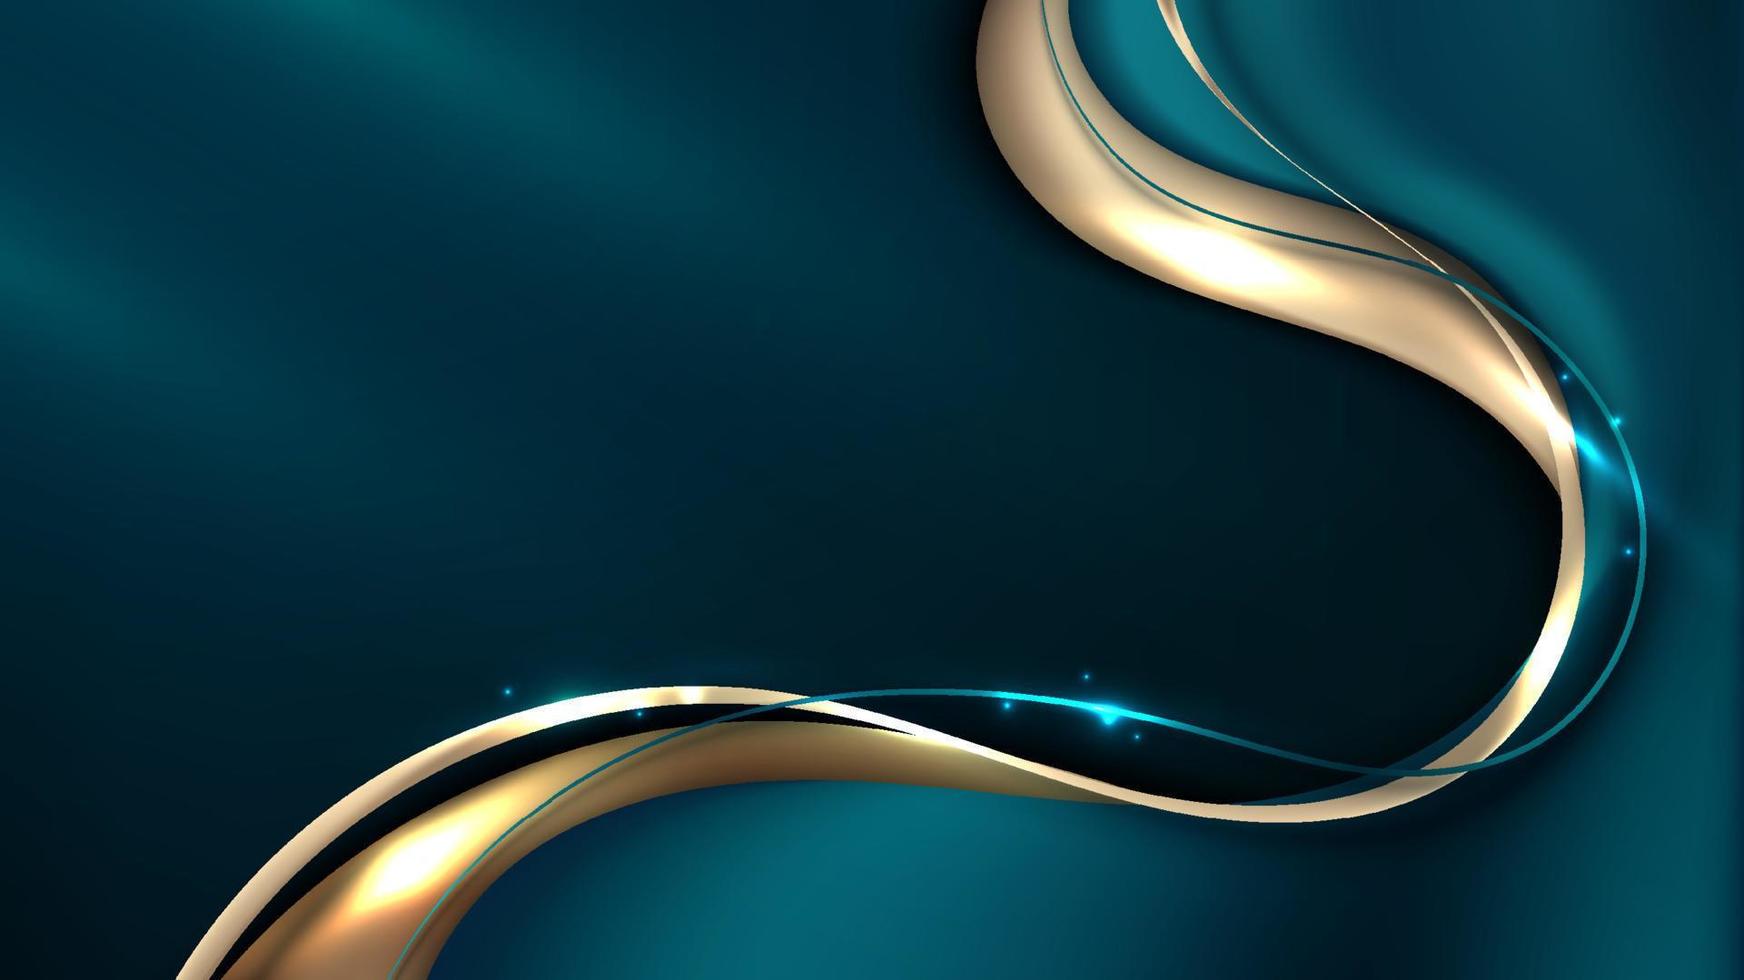 Abstract 3D luxury blue emerald and gold color liquid gradient shapes with shiny golden ribbon wave line decoration and glitter lighting on dark background vector